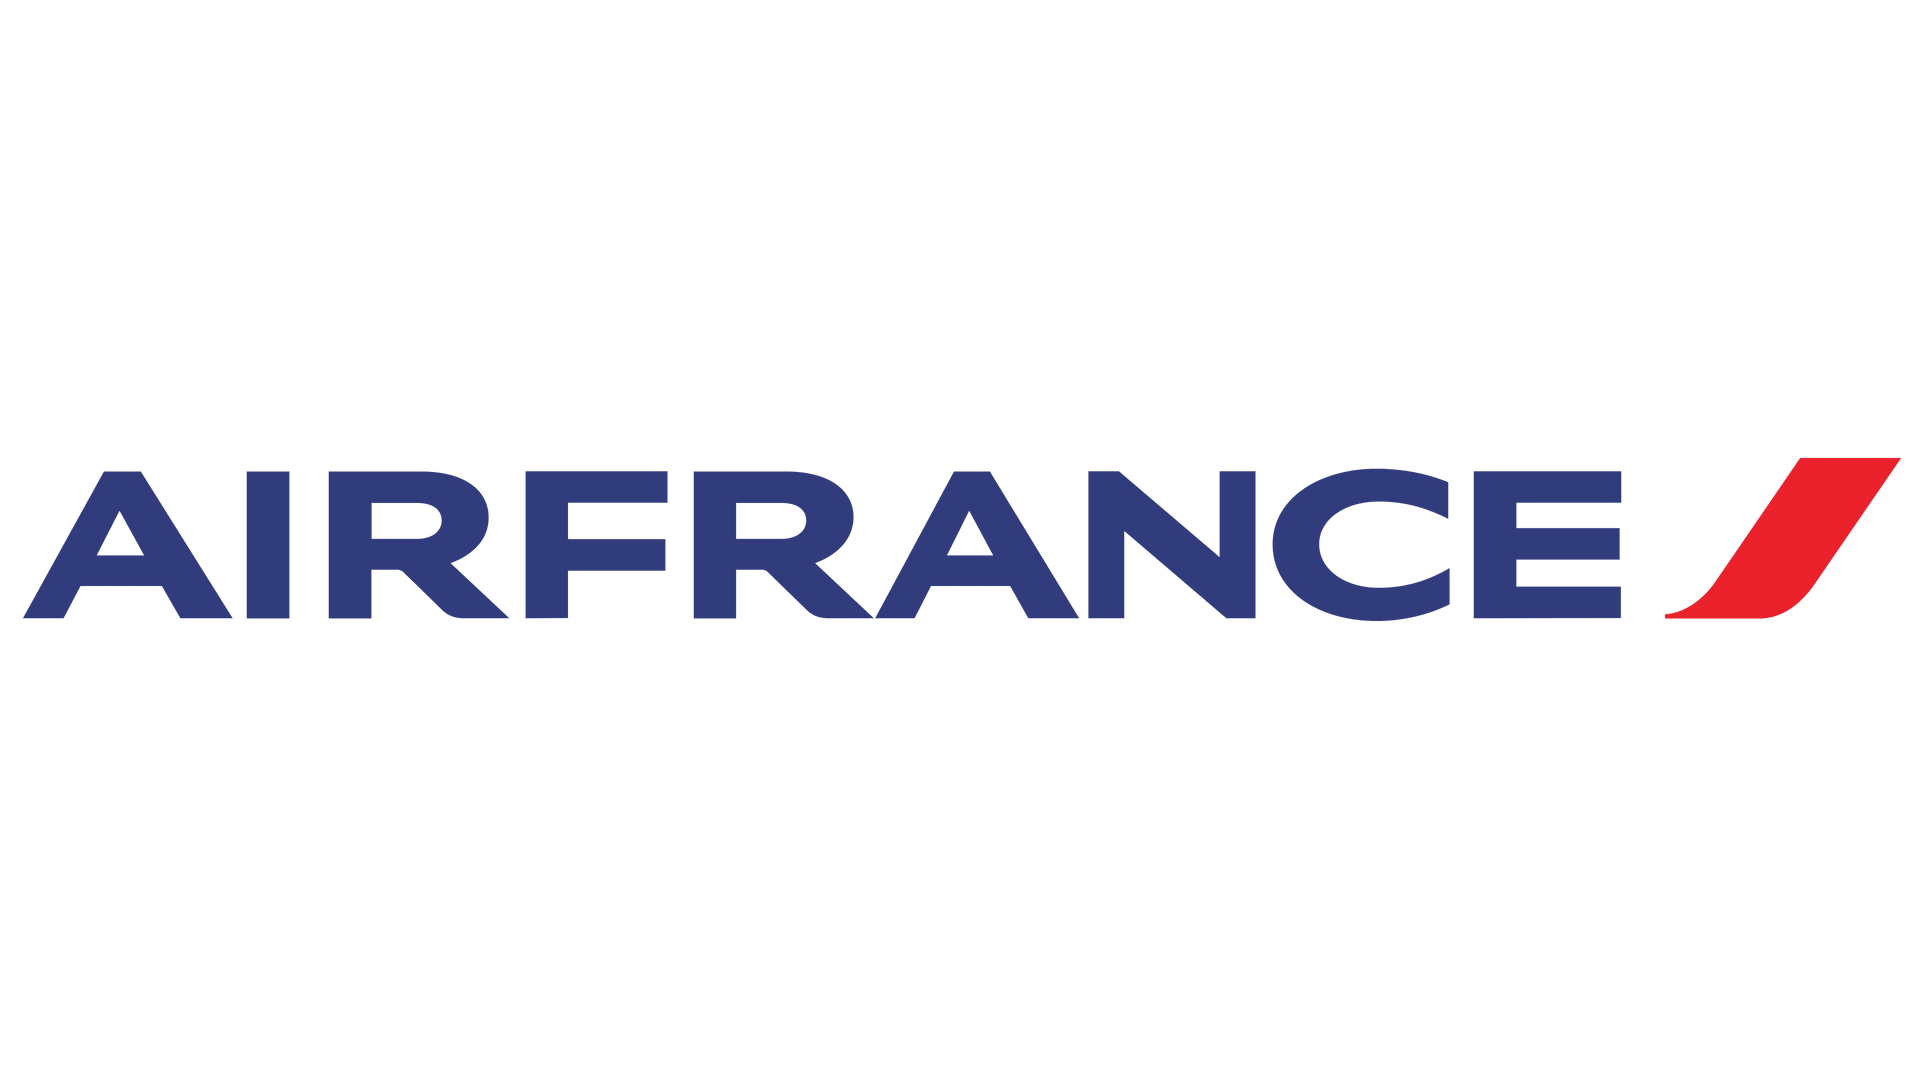 the airfrance logo is blue , red and white on a white background .